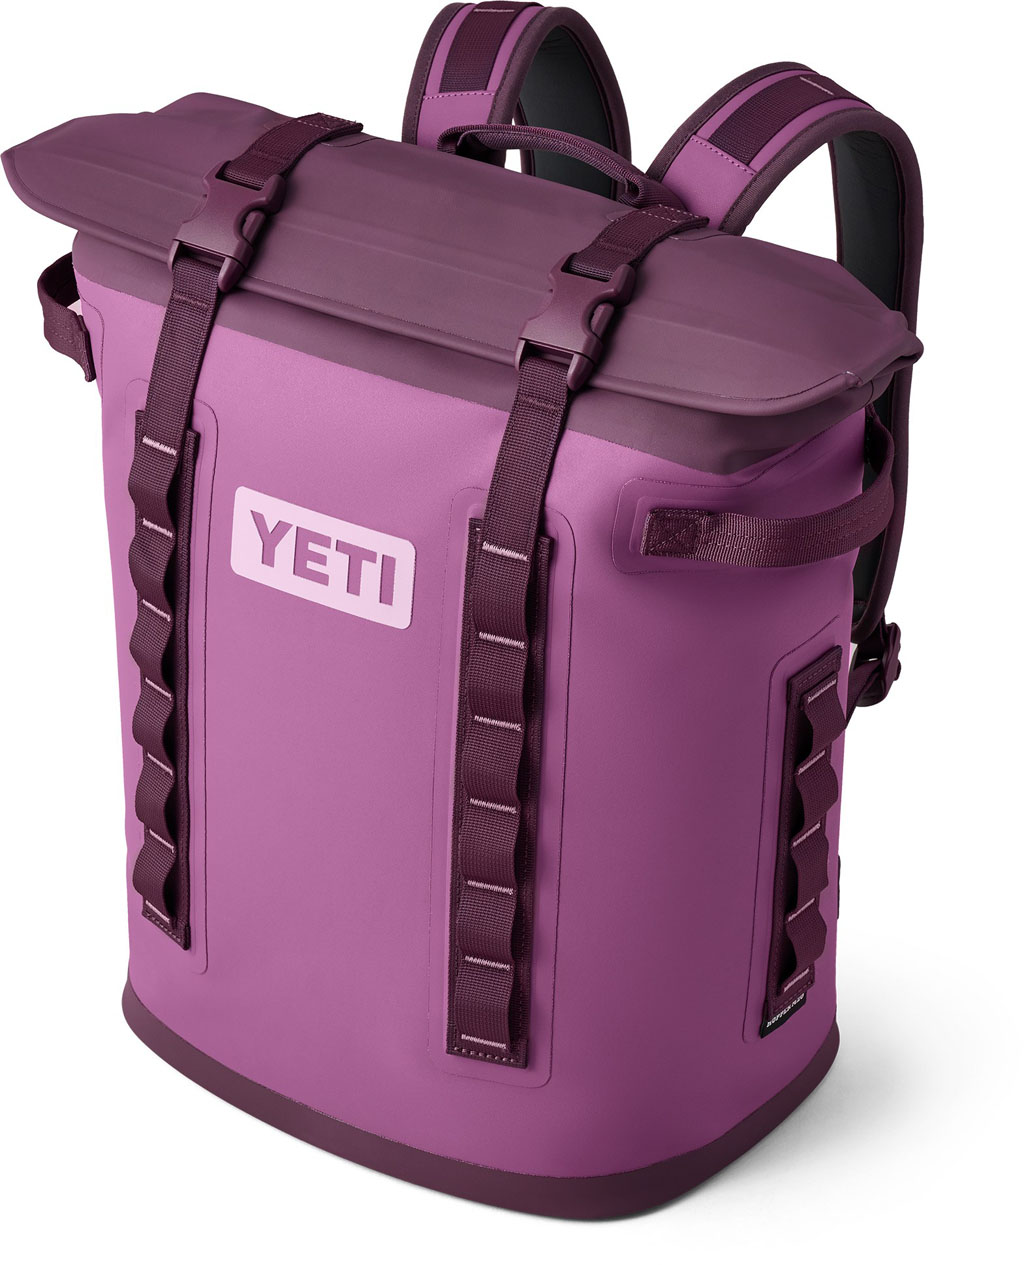 bright purple modern backpack cooler that says Yeti